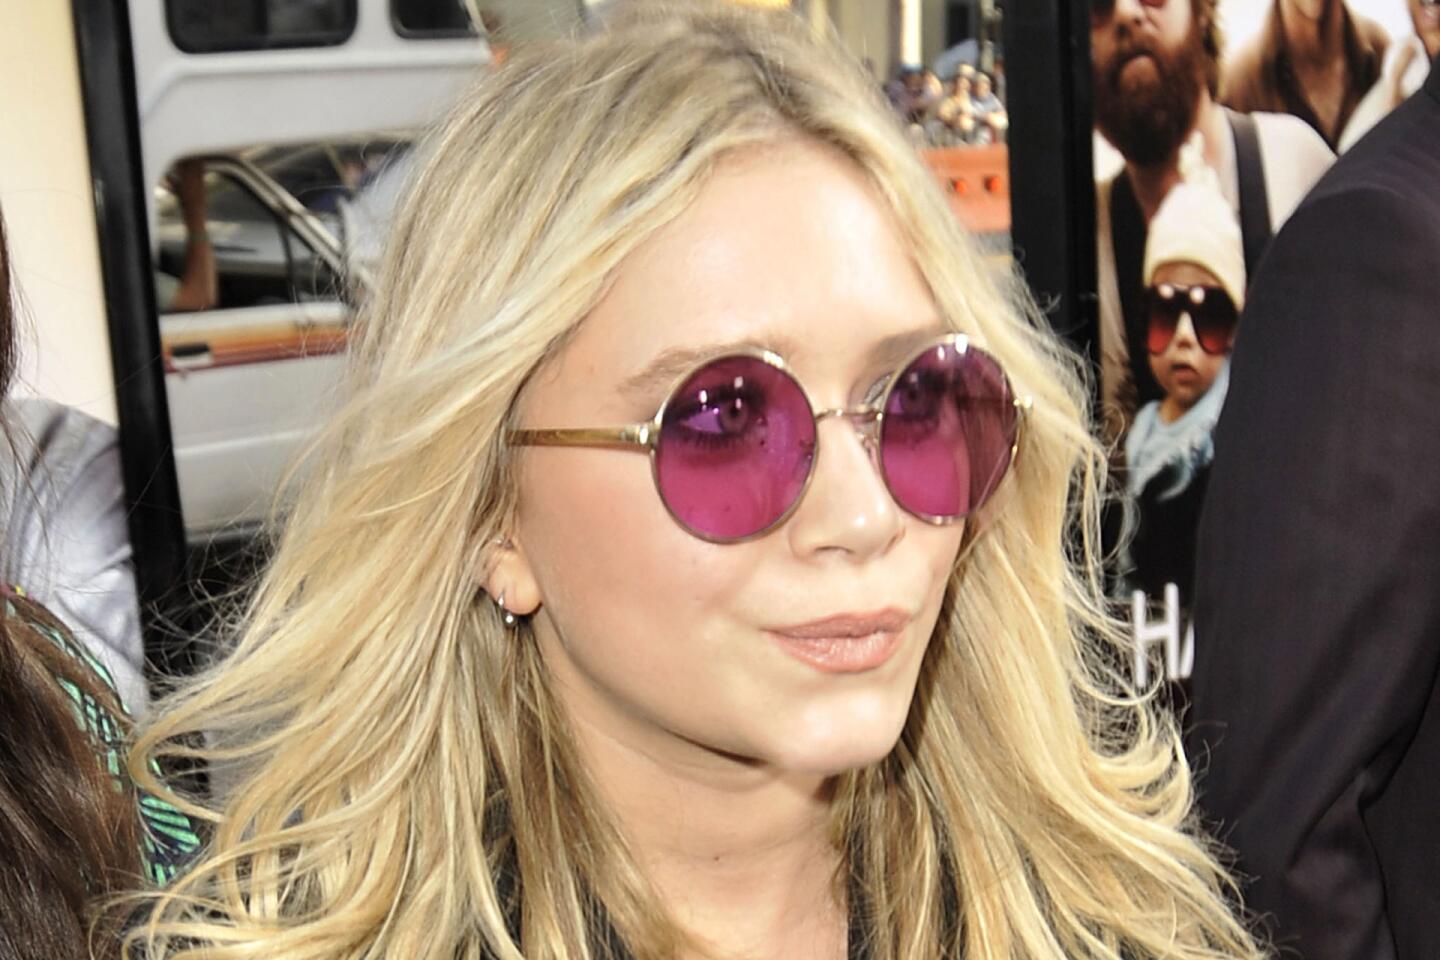 LOUIS VUITTON SUNGLASSES- Pink-woman for Sale in Bedford Hills, NY